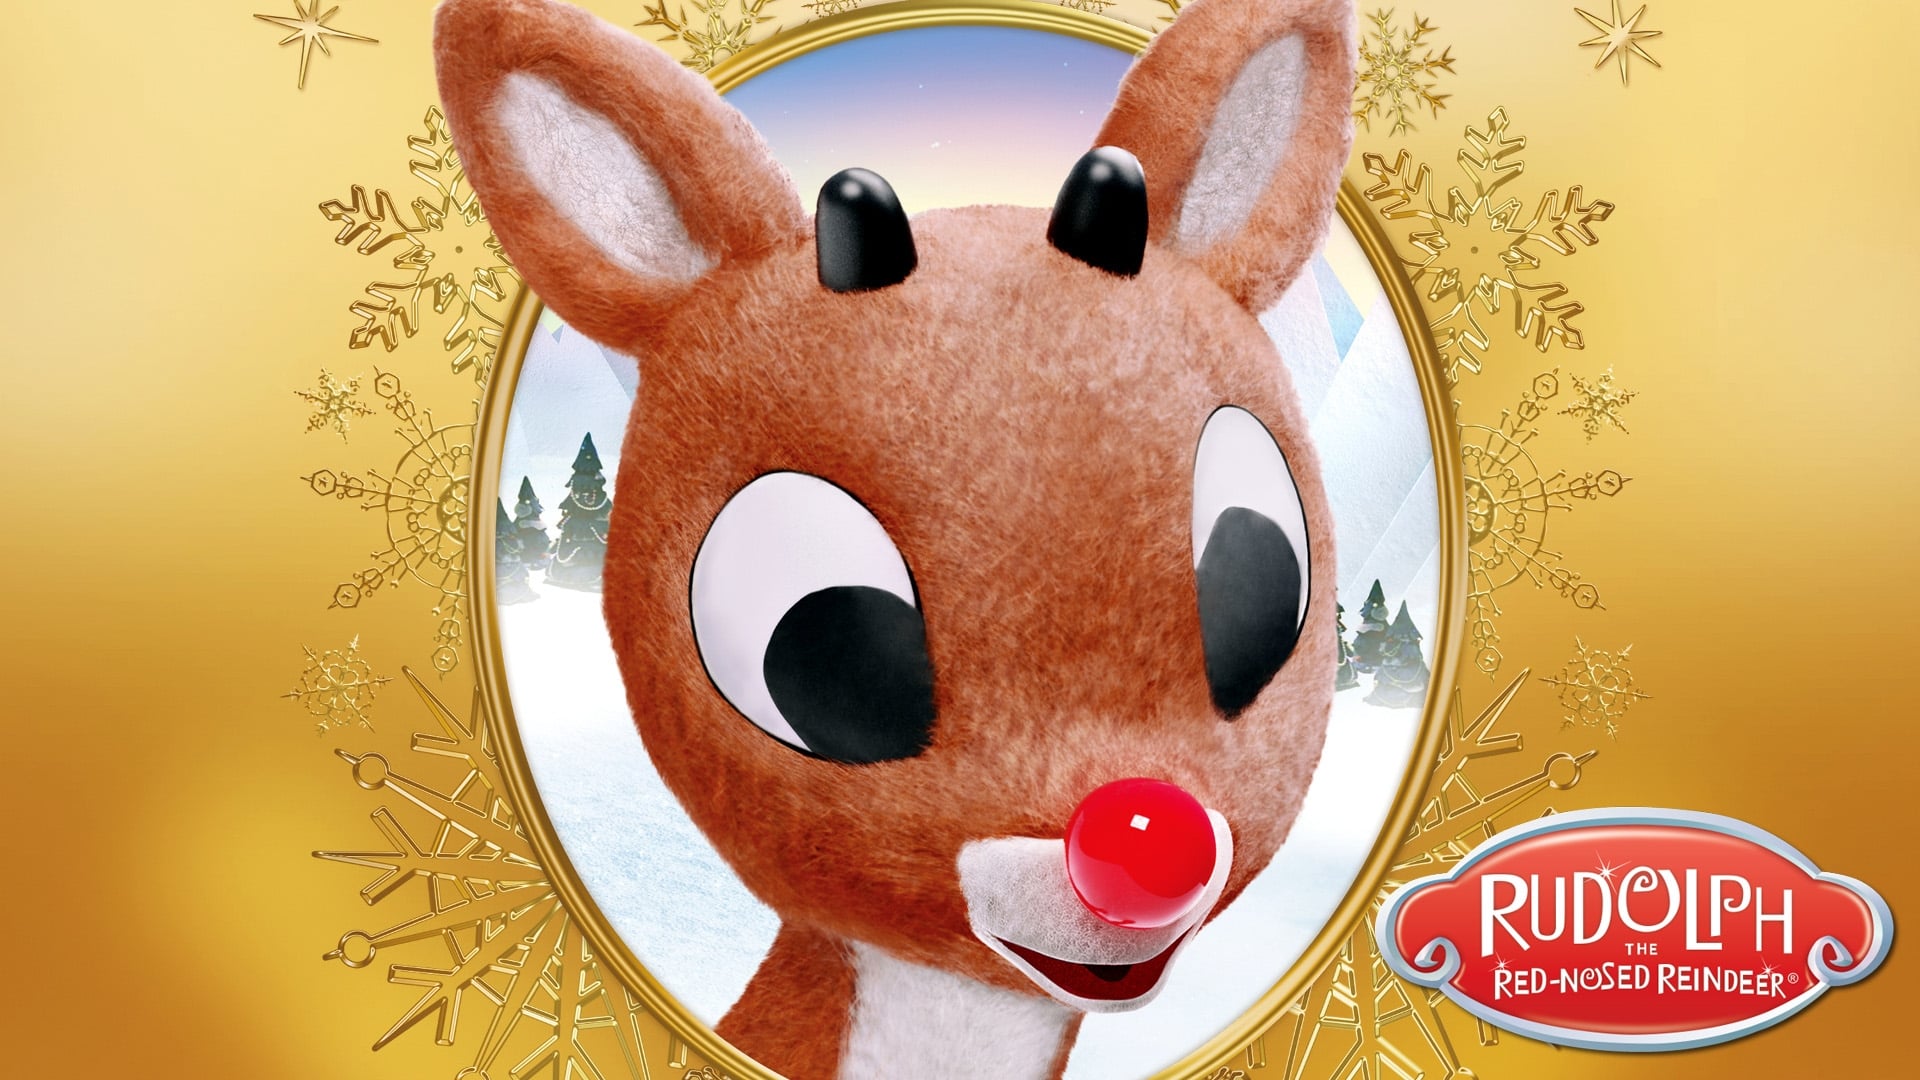 44-facts-about-the-movie-rudolph